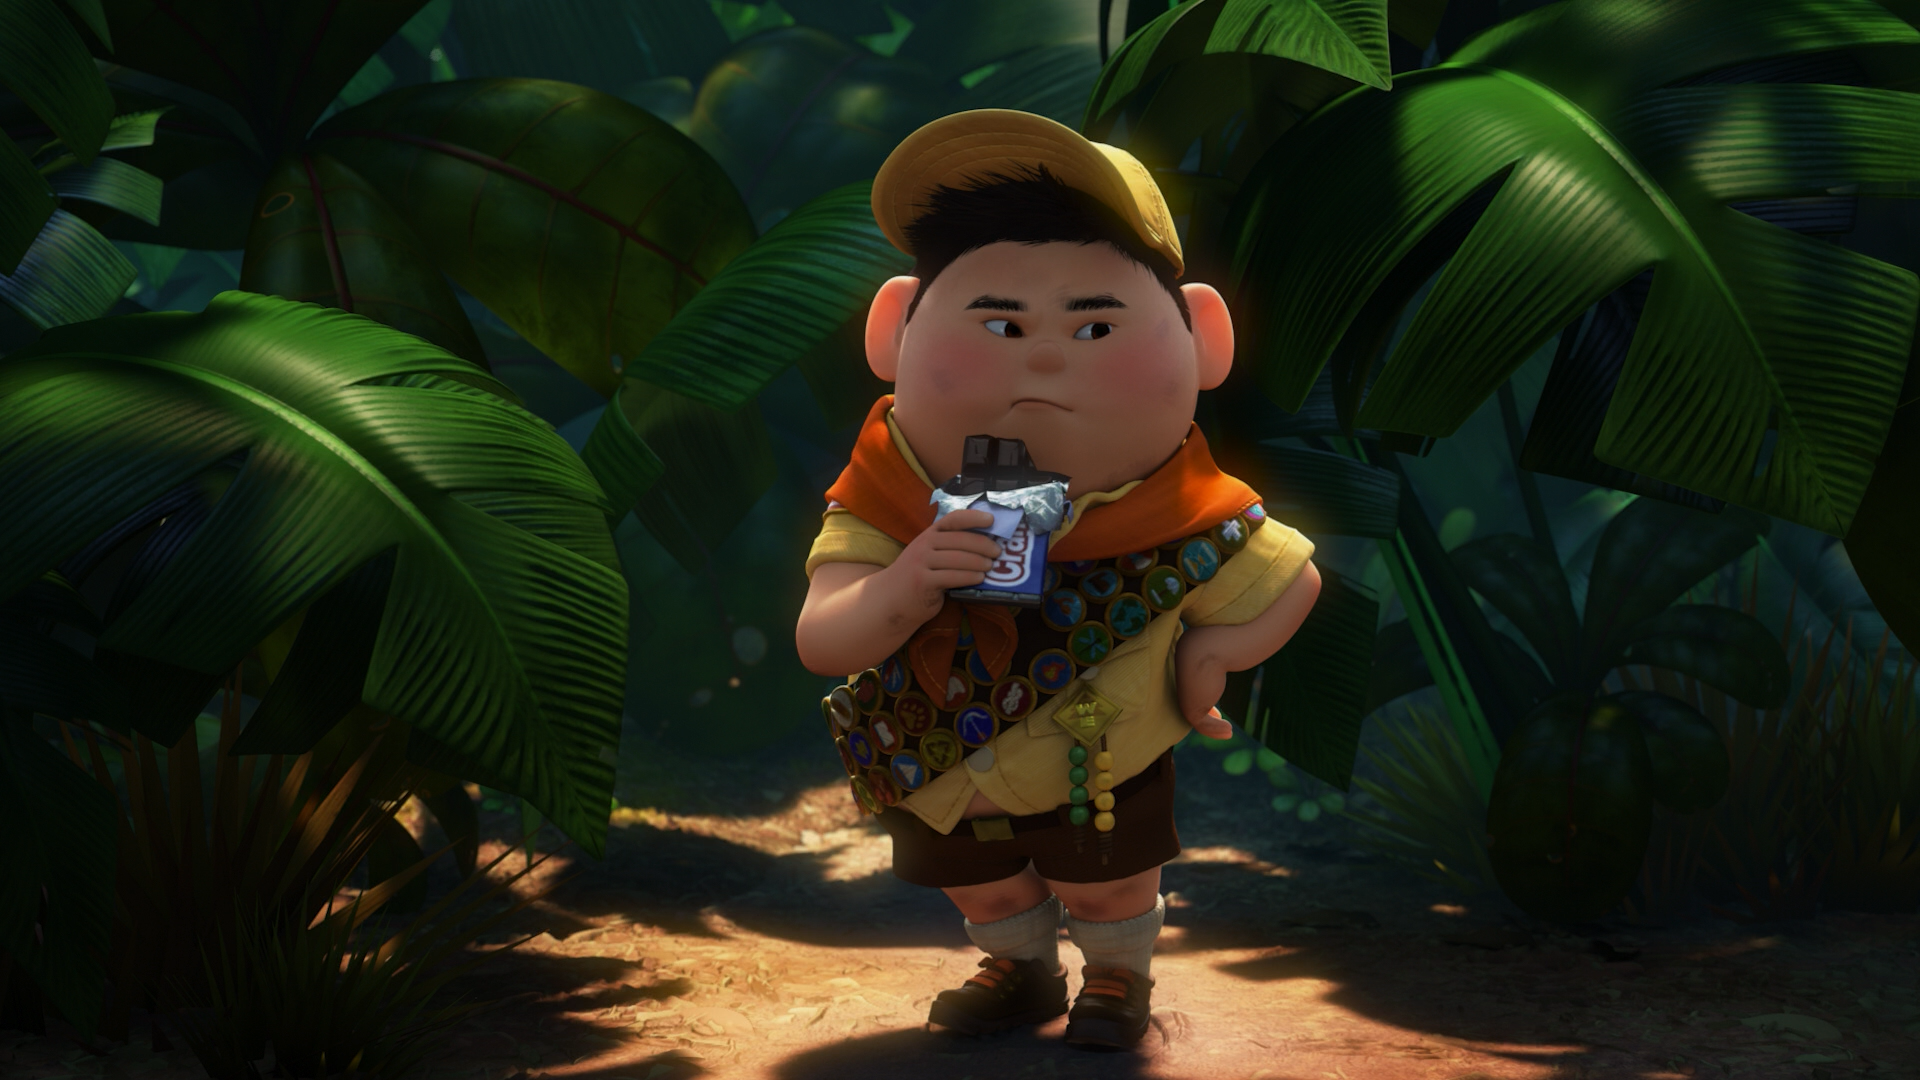 Image Russell  chocolate Up  png Disney Wiki FANDOM 